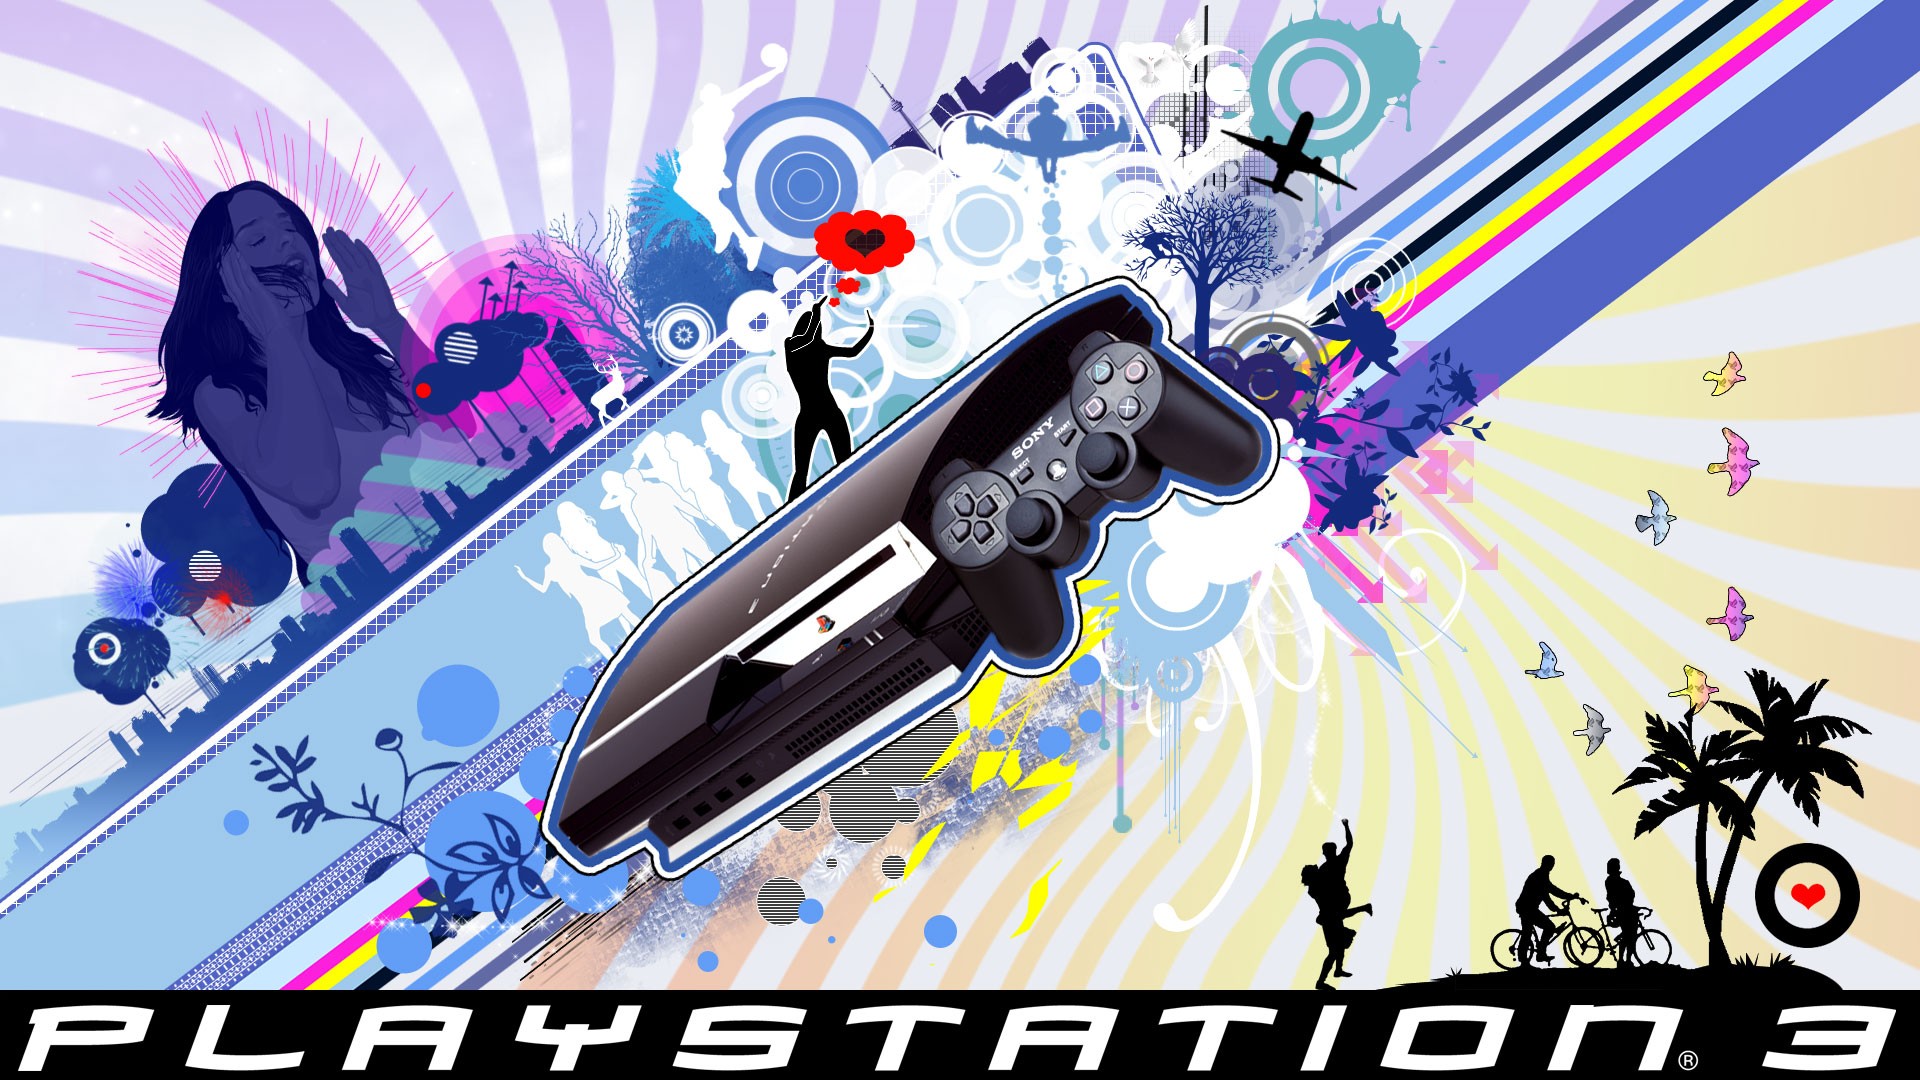 Play Station 3 Wallpapers